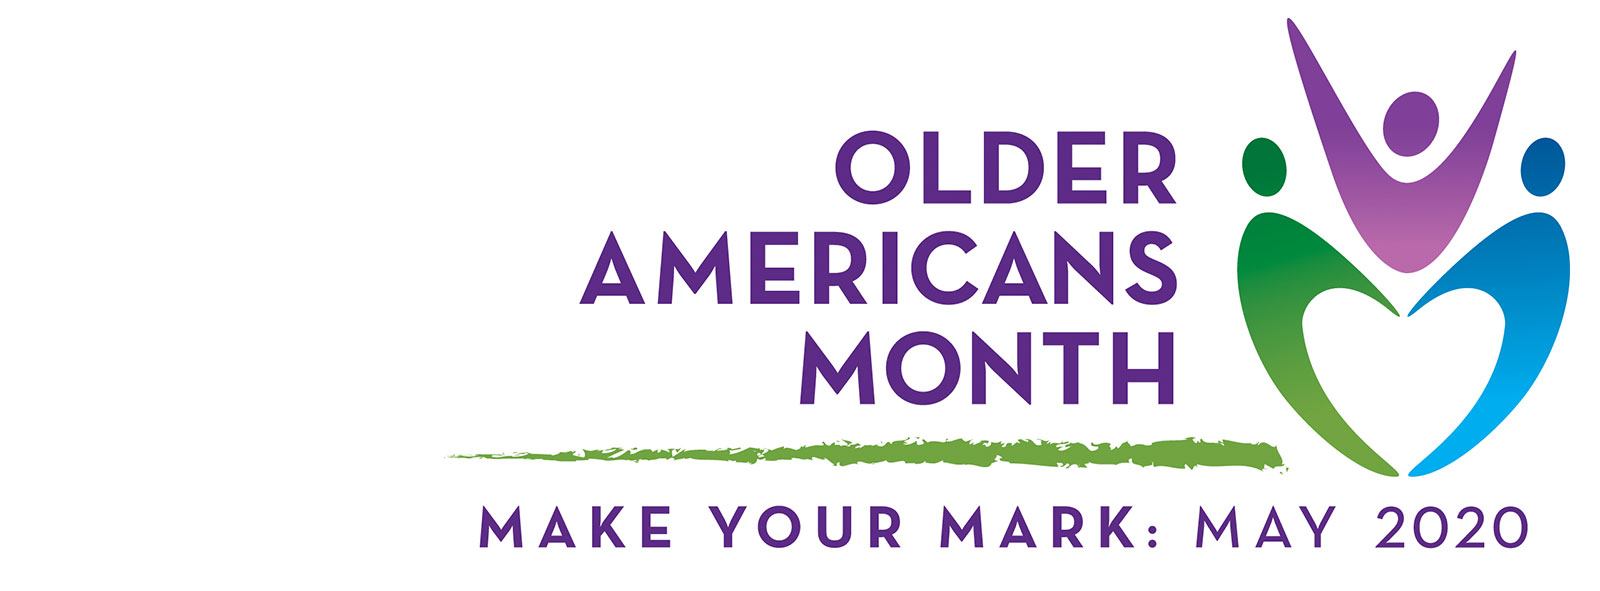 Cedar Cove Assisted Living is celebrating Older Americans Month.